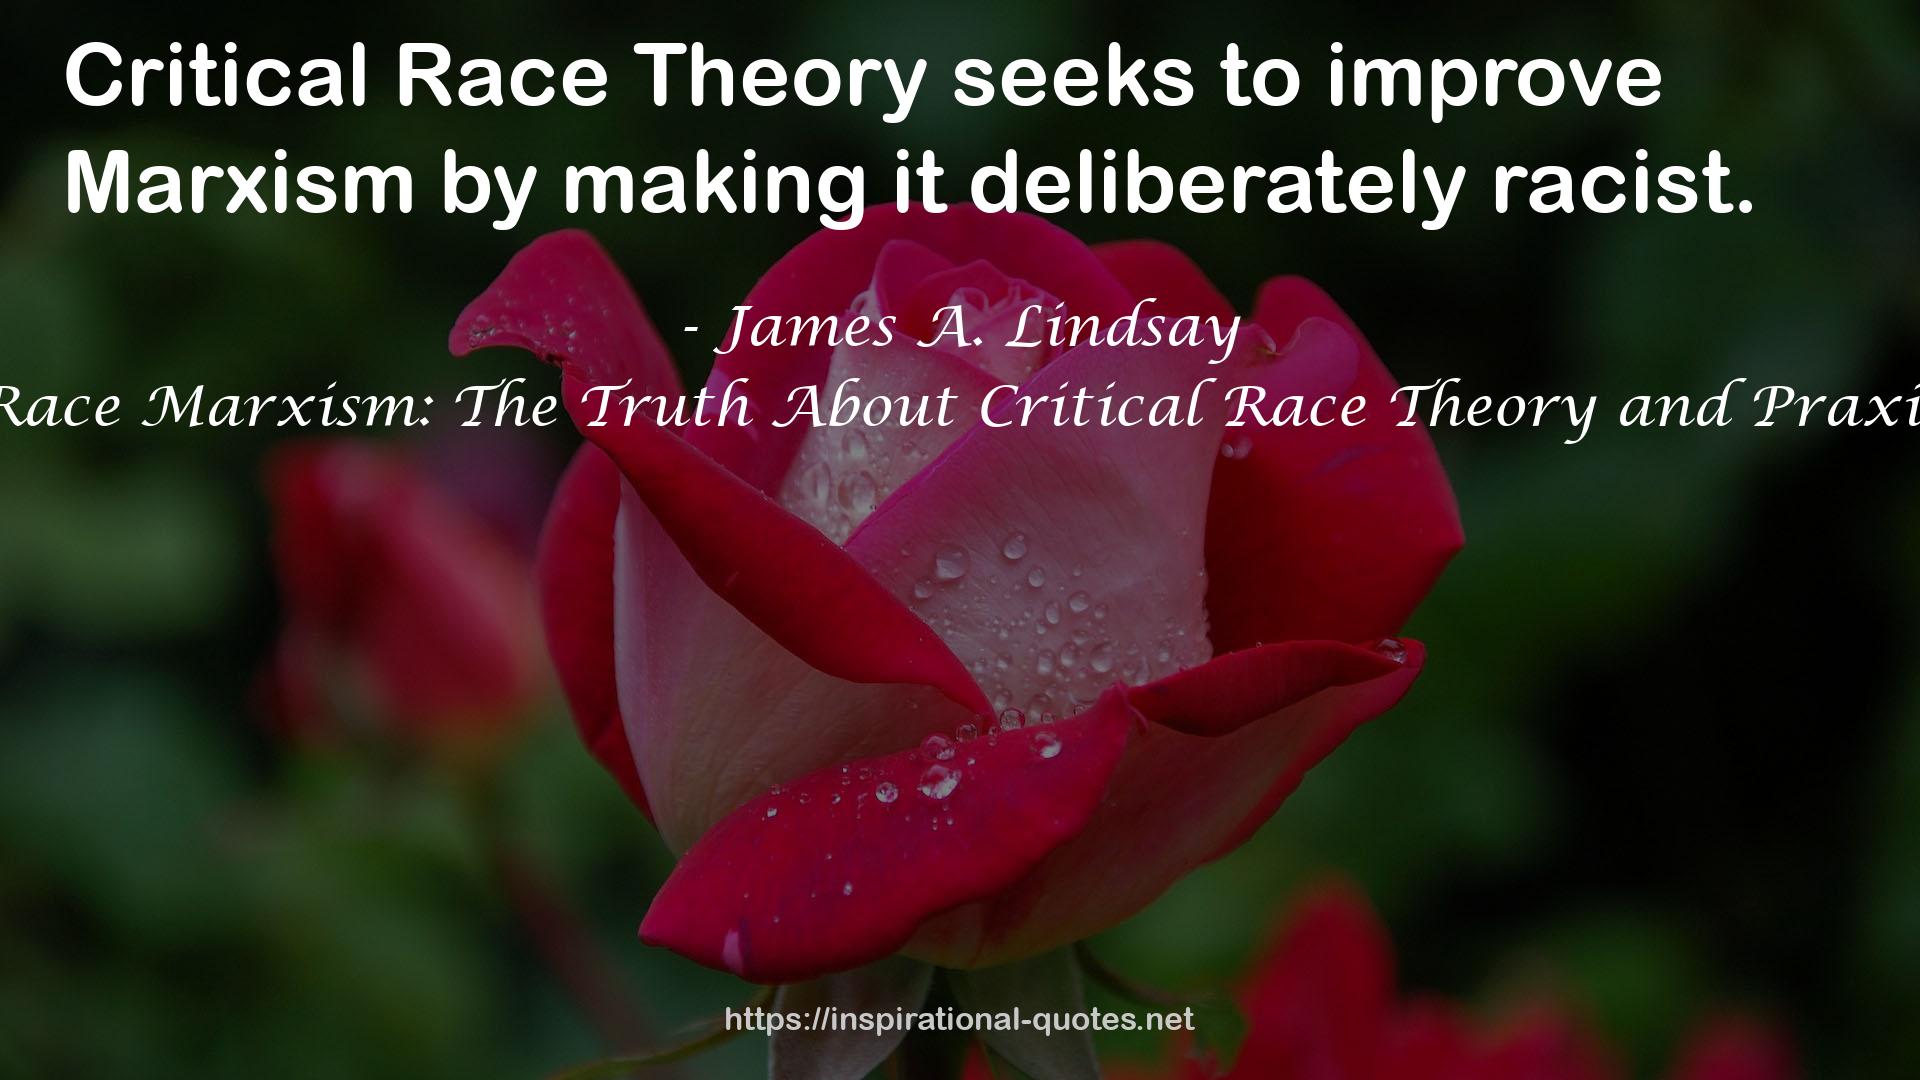 Race Marxism: The Truth About Critical Race Theory and Praxis QUOTES